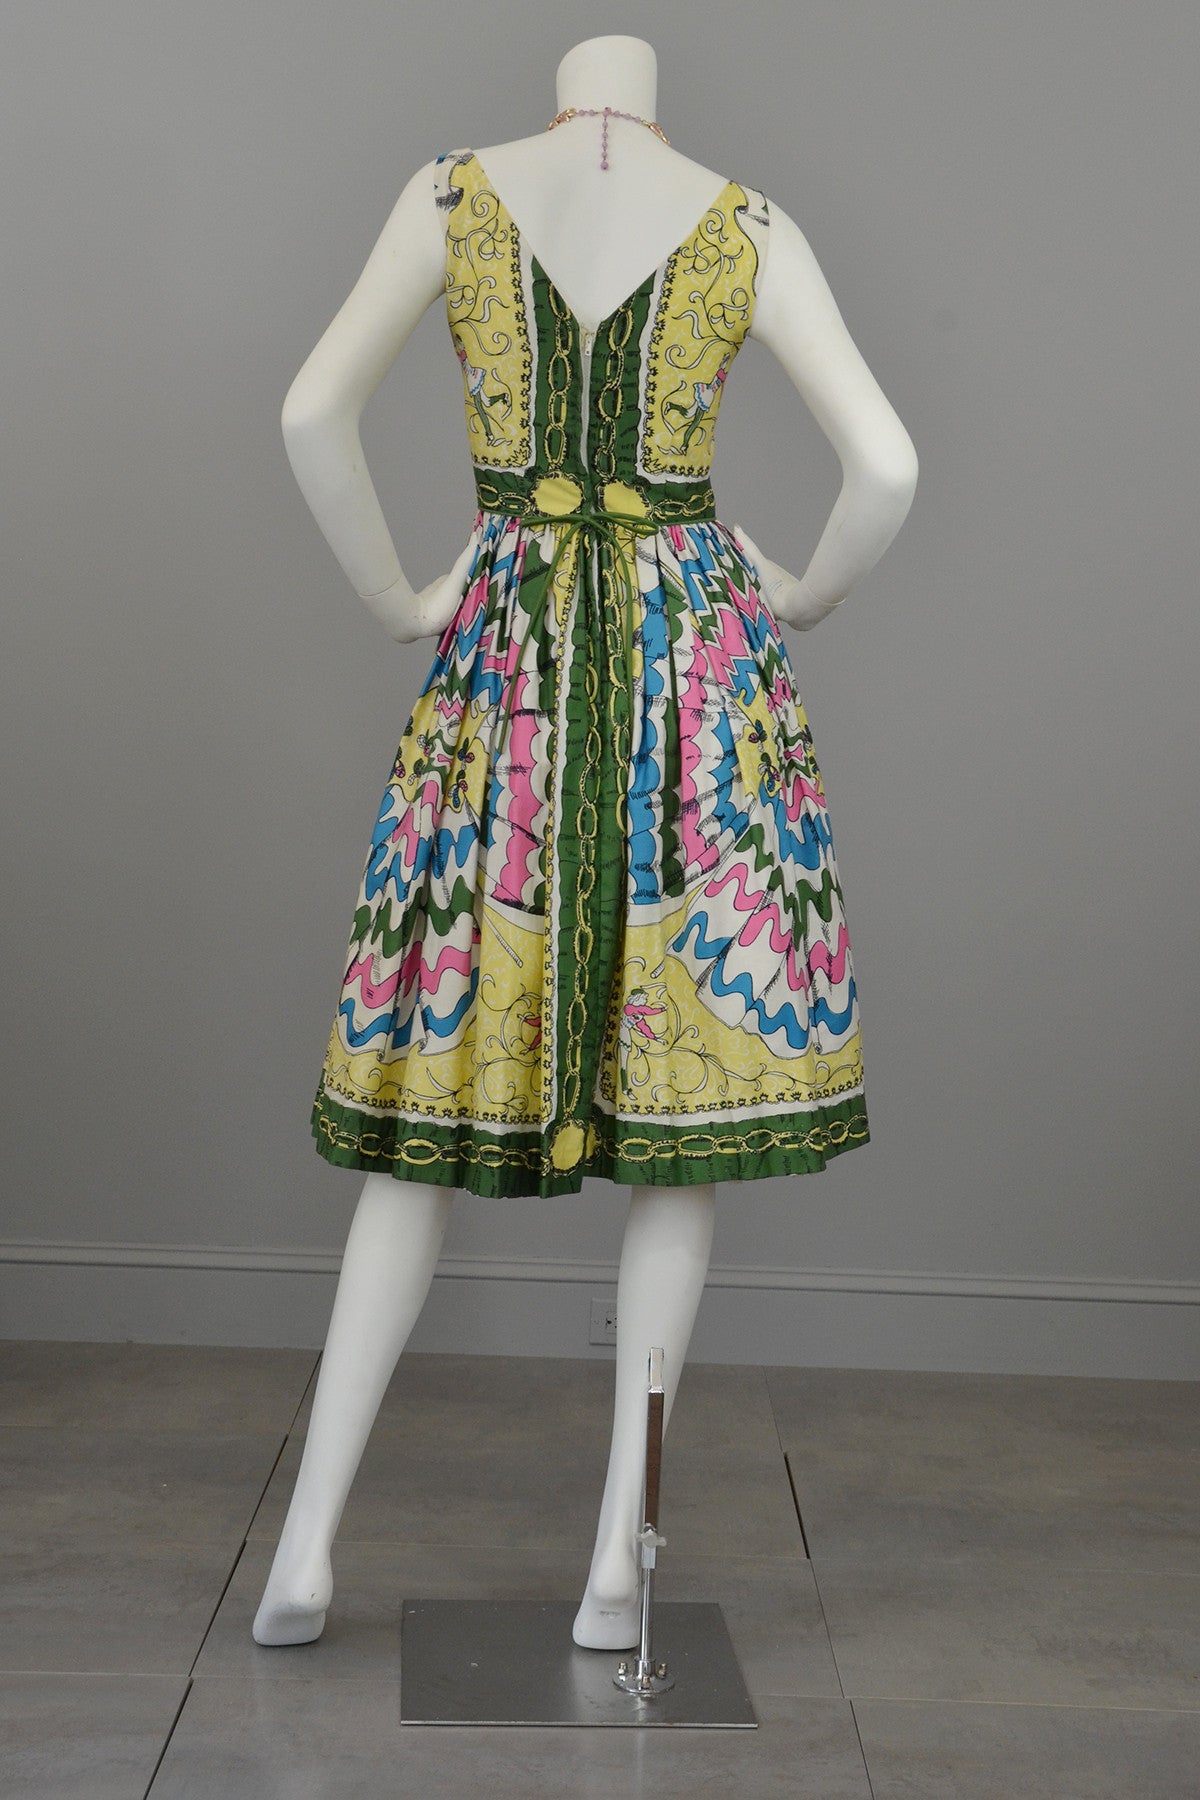 1950s Novelty Print Vintage Dress with Dancing Jesters